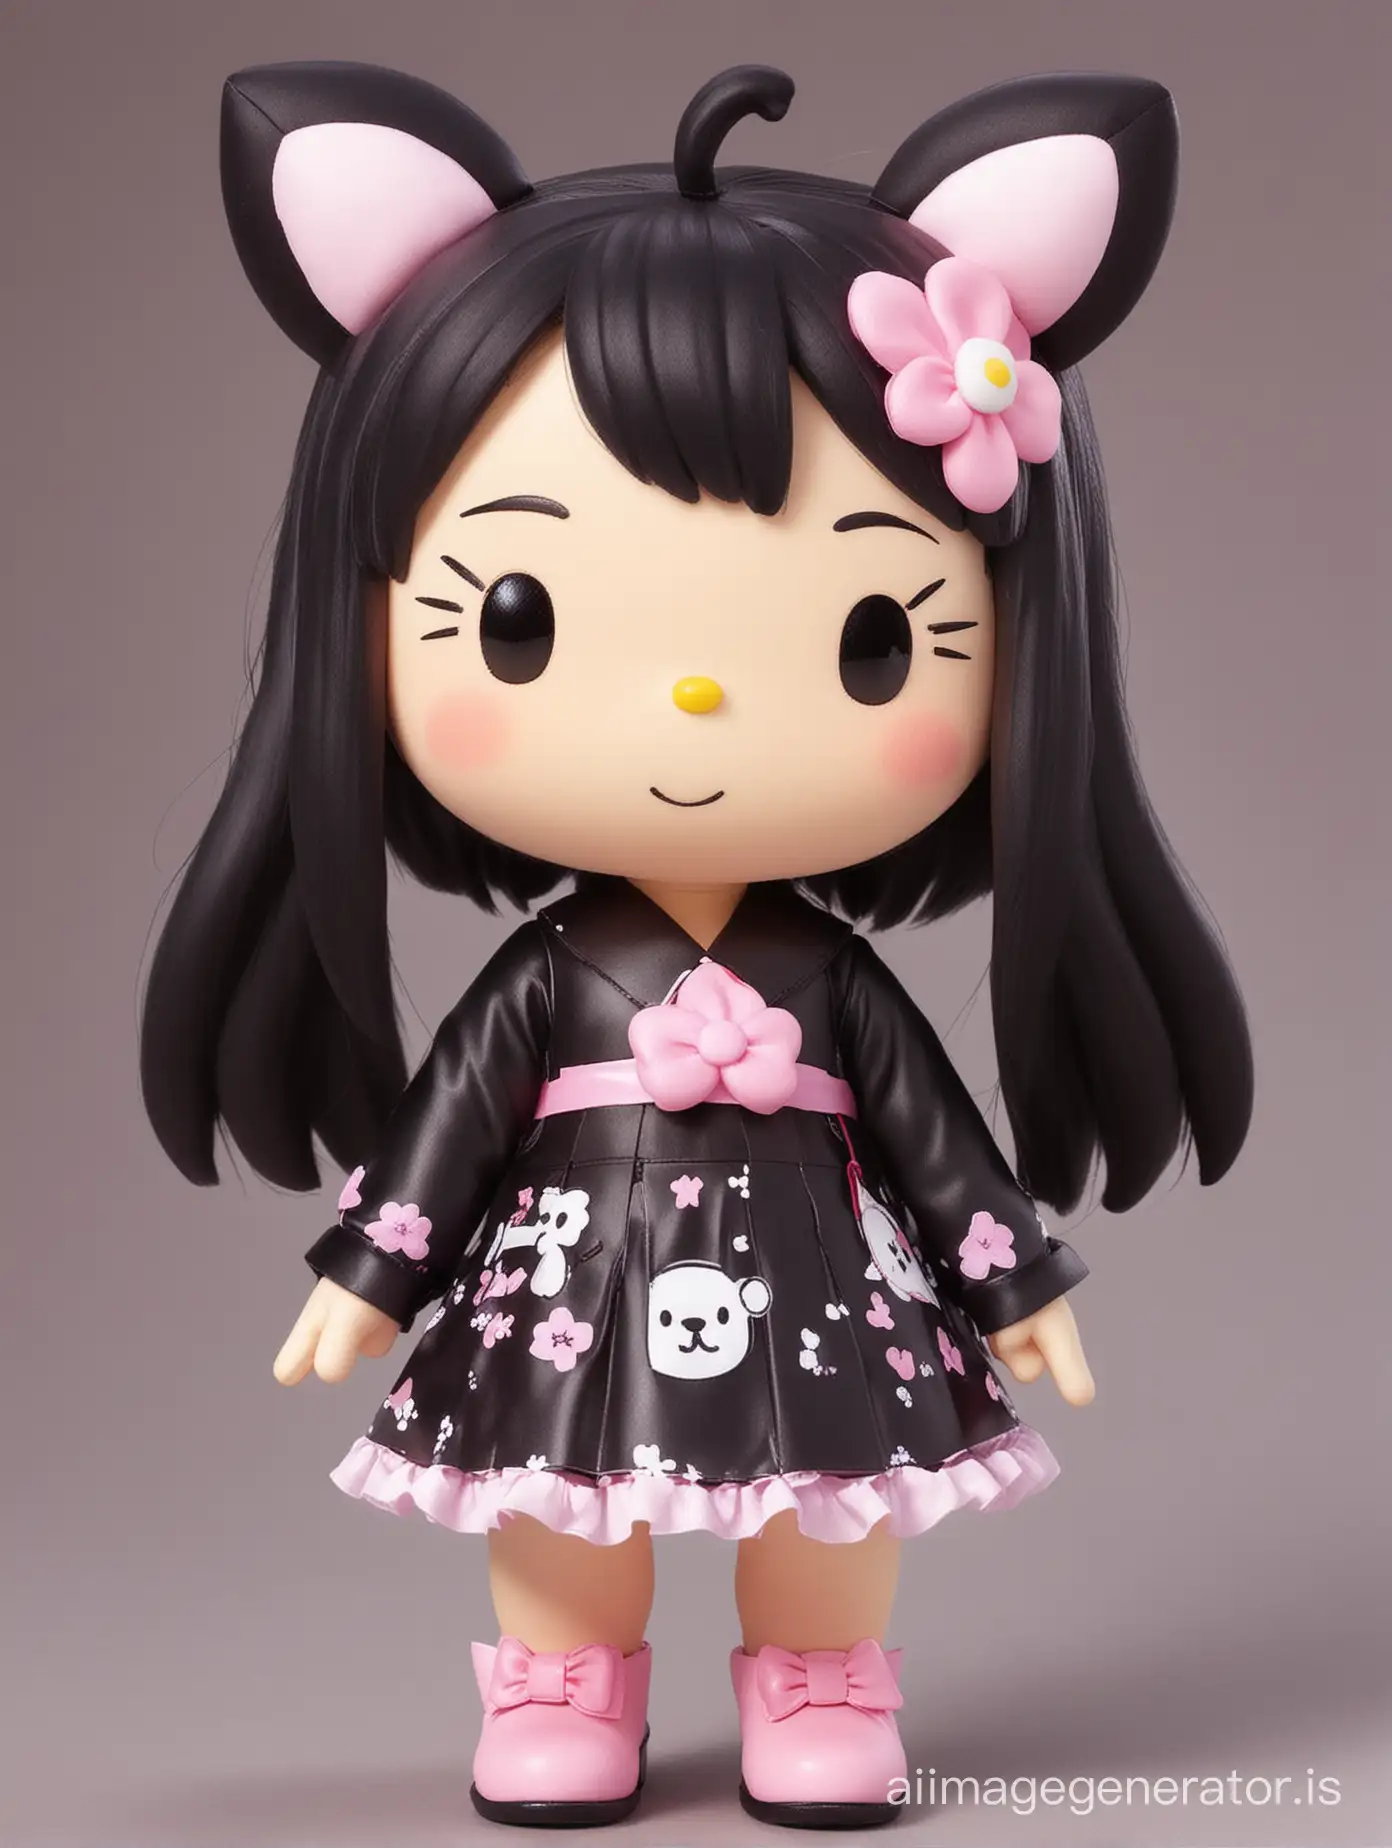 Sanrio-Kuromi-Playful-Girl-in-Anime-Style-with-Colorful-Background